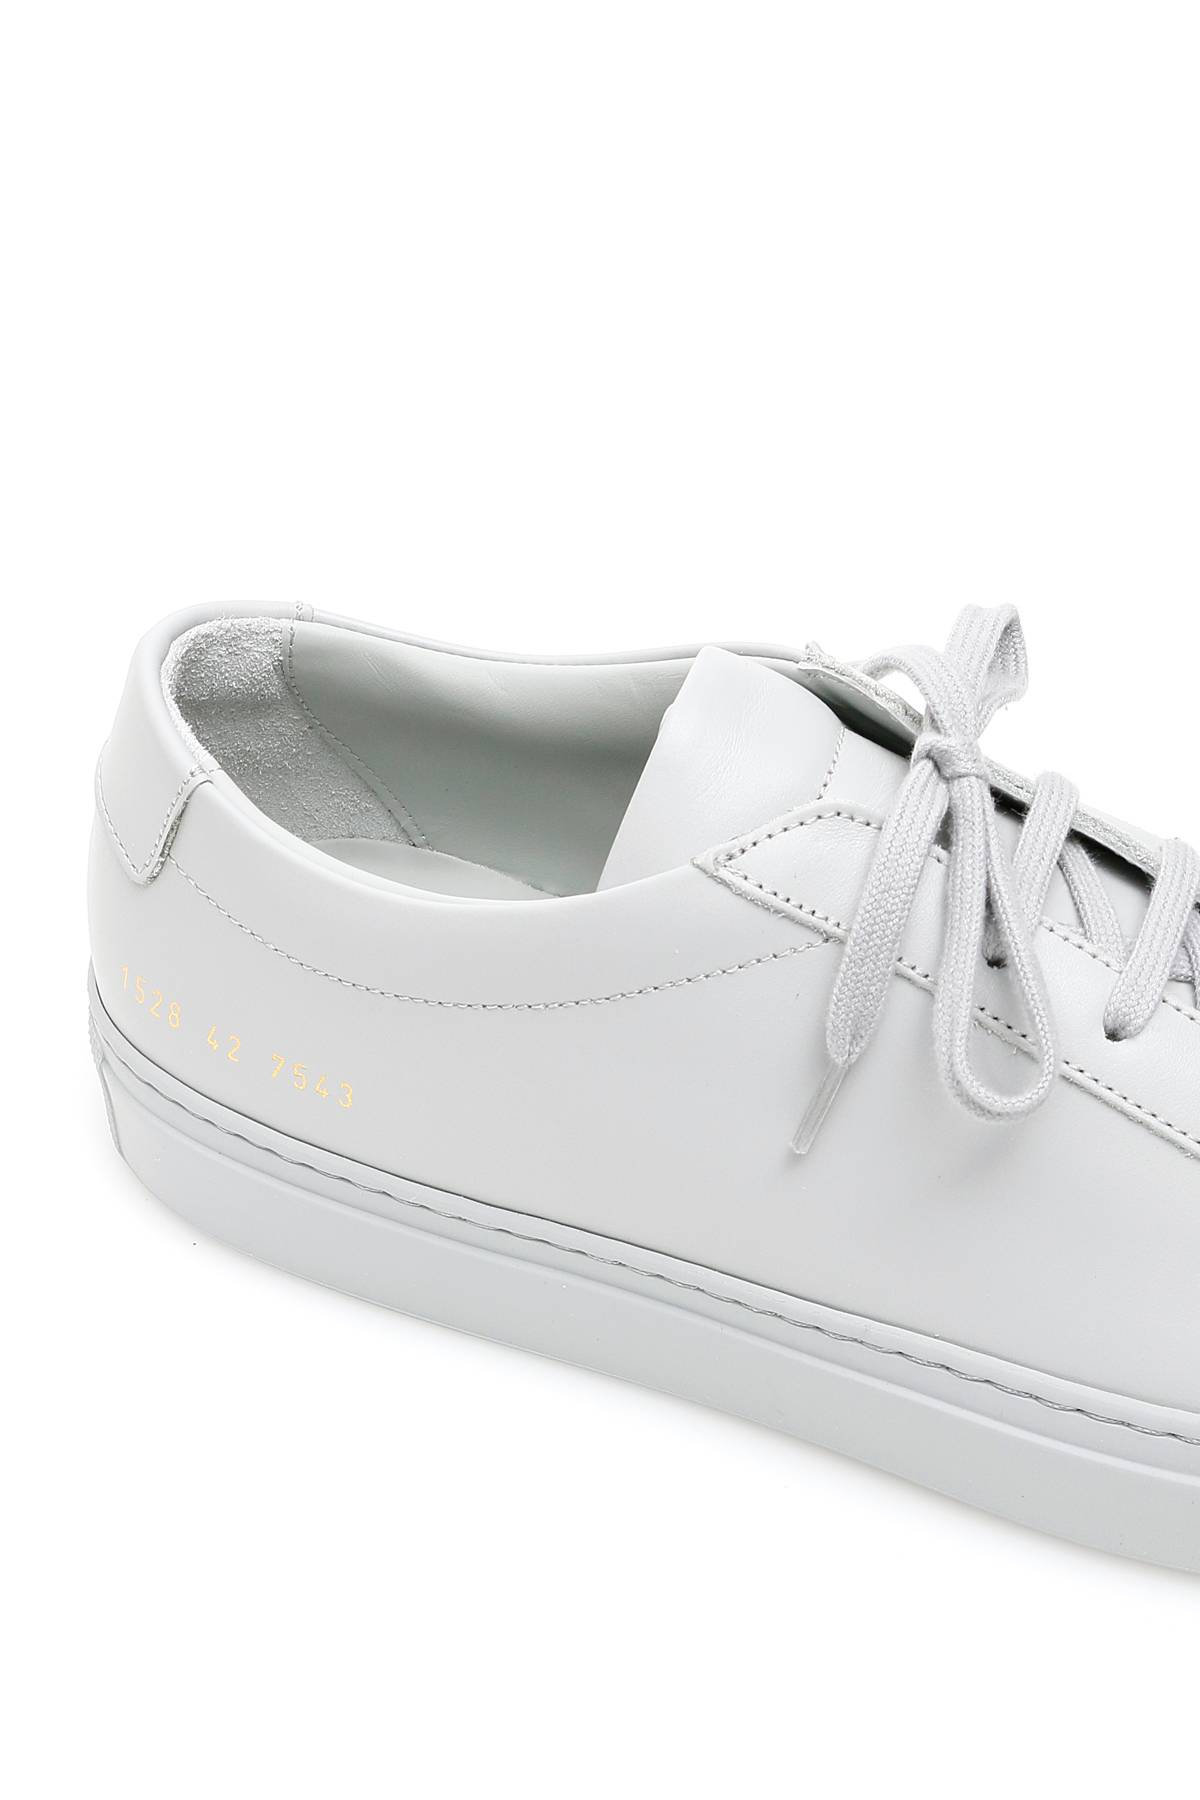 Shop Common Projects Original Achilles Low Sneakers In Grey